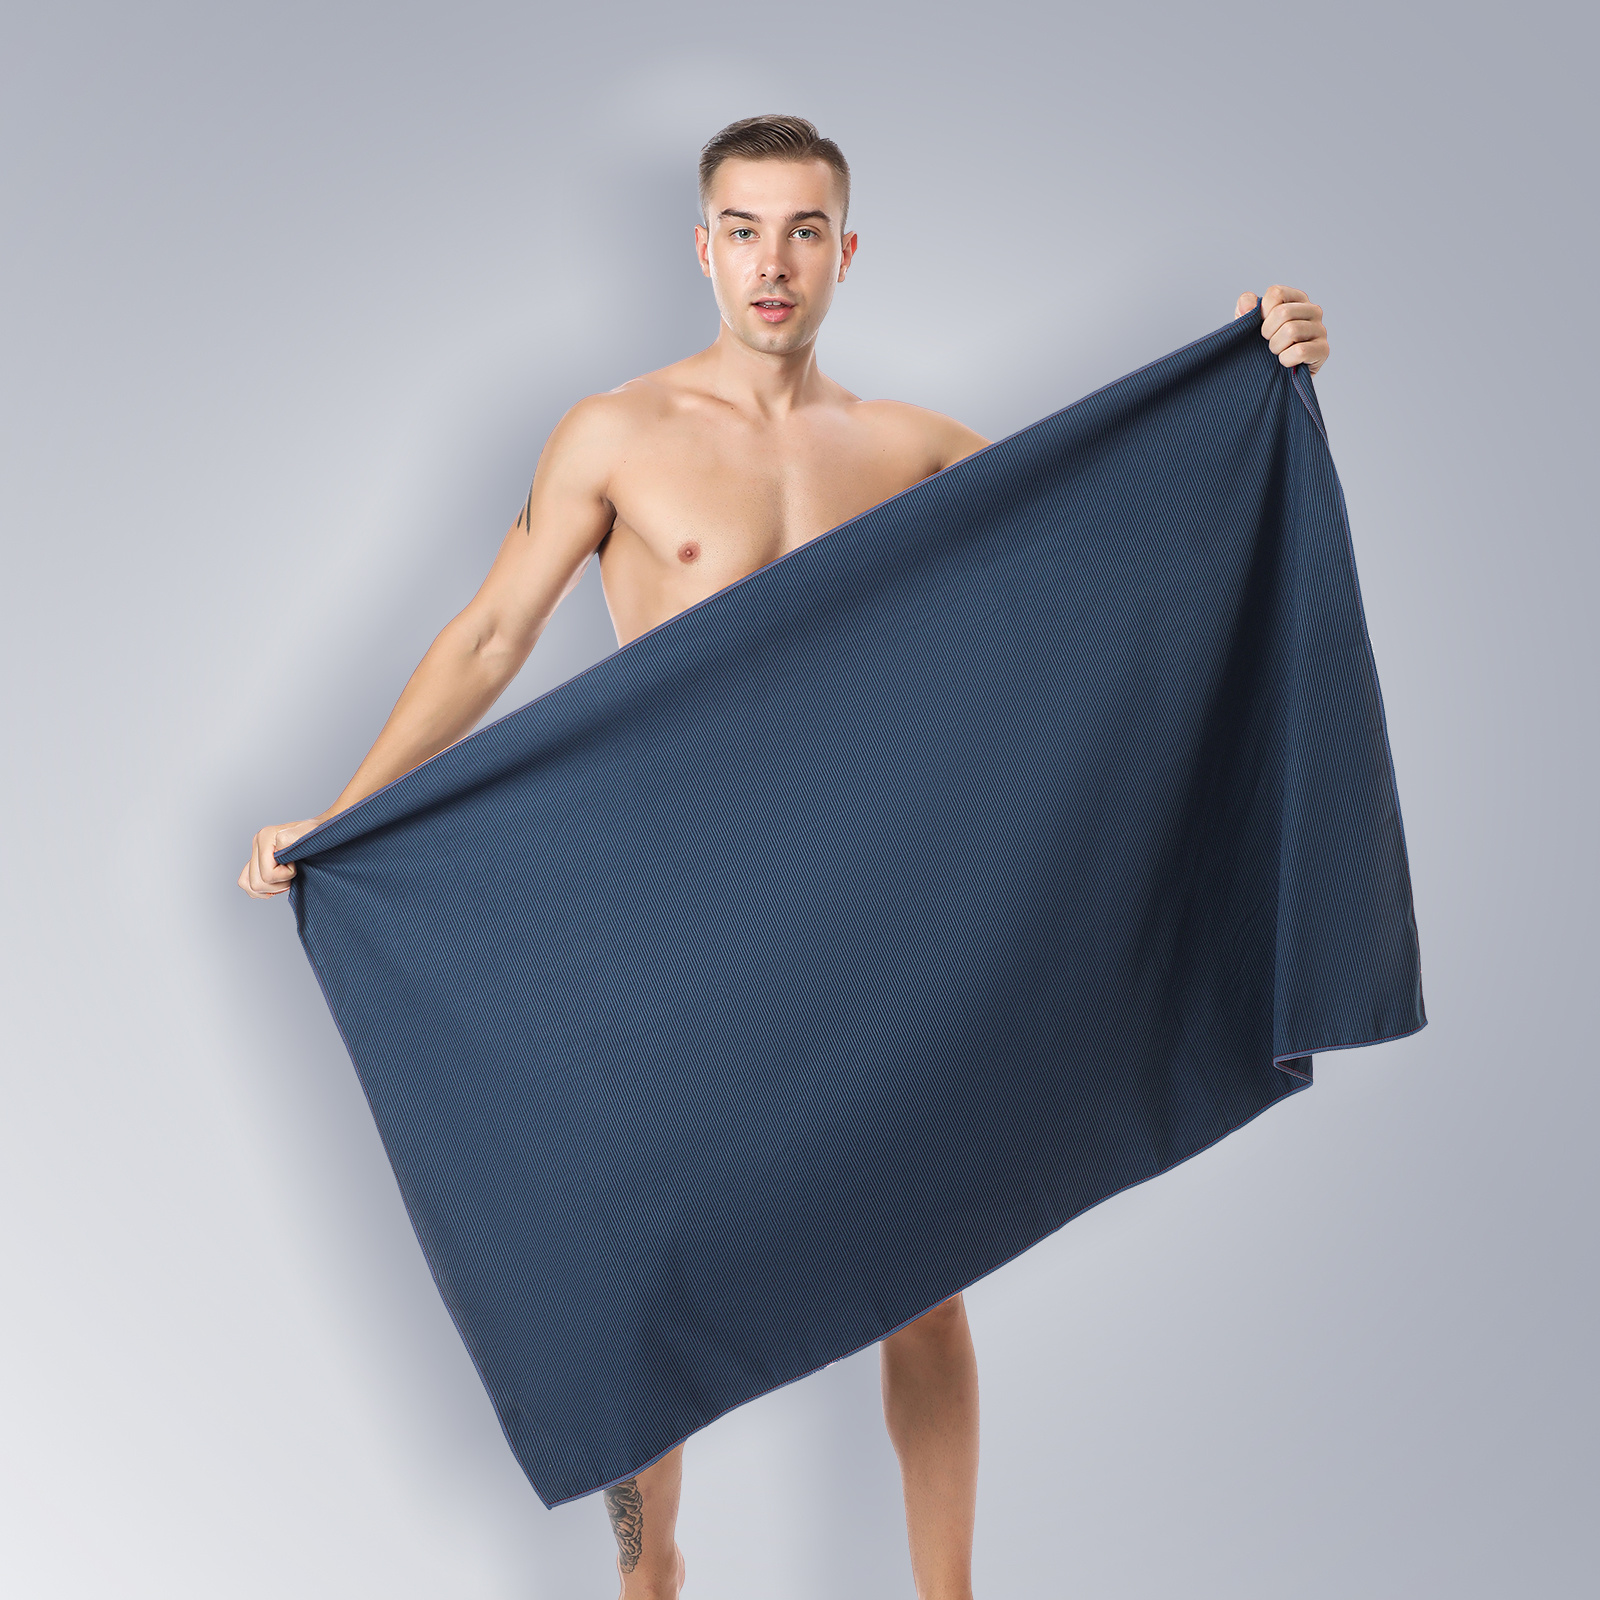 

Mutao Quick Dry Microfiber Travel Towel And Blanket For Sports, Swimming, Gym, Yoga - Soft And Absorbent